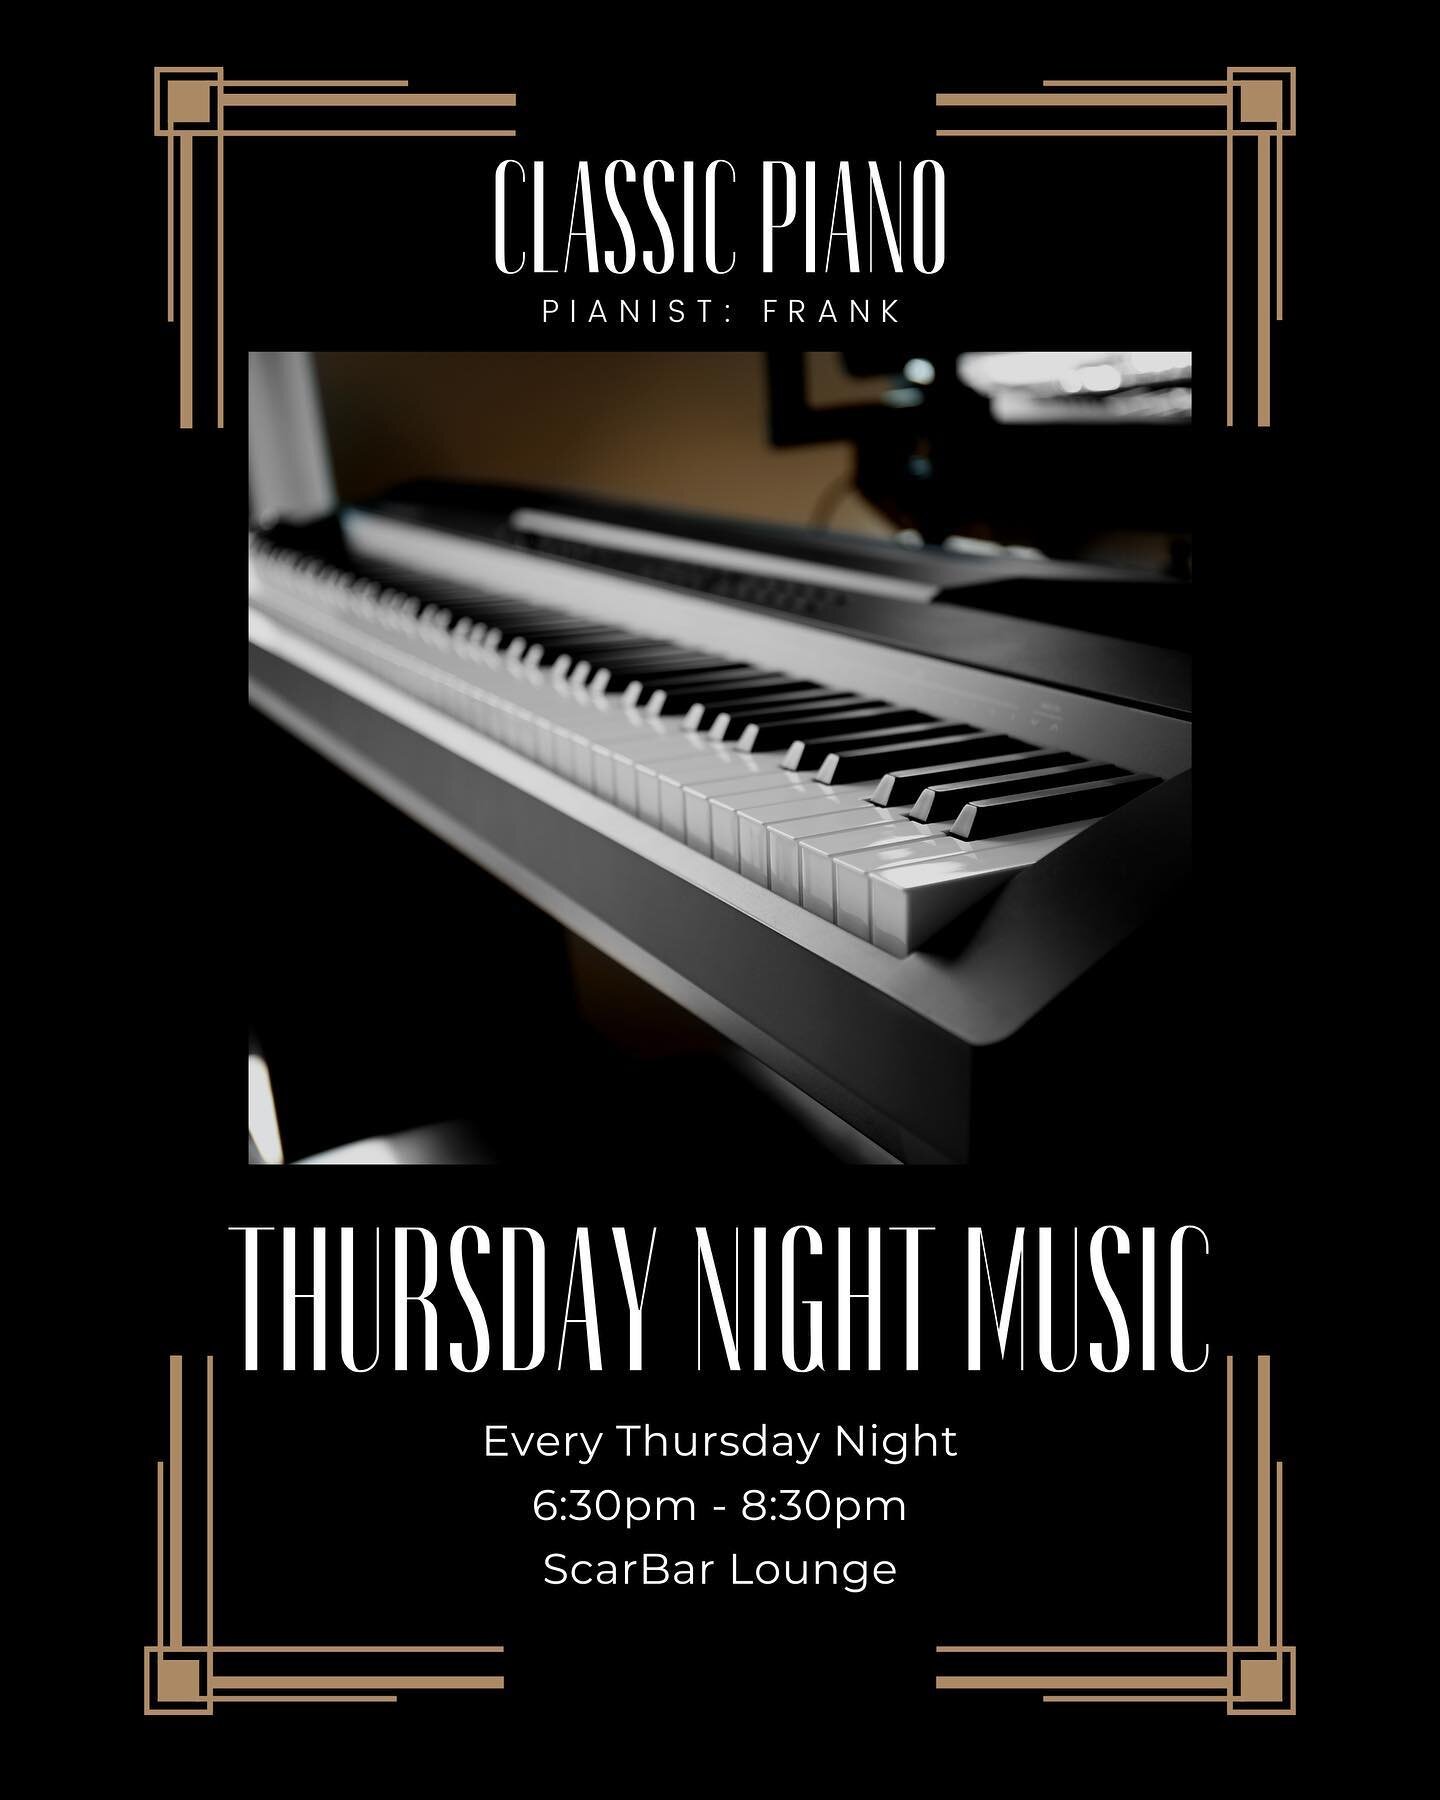 Live Piano every Thursday night! 6:30-8:30 pm. Can be heard throughout the entire restaurant no matter where your table is. 

#piano #pianist #music #thursday #bar #lounge #scarboroughfair #seagirt #jerseyshore #shore #drinks #happyhour